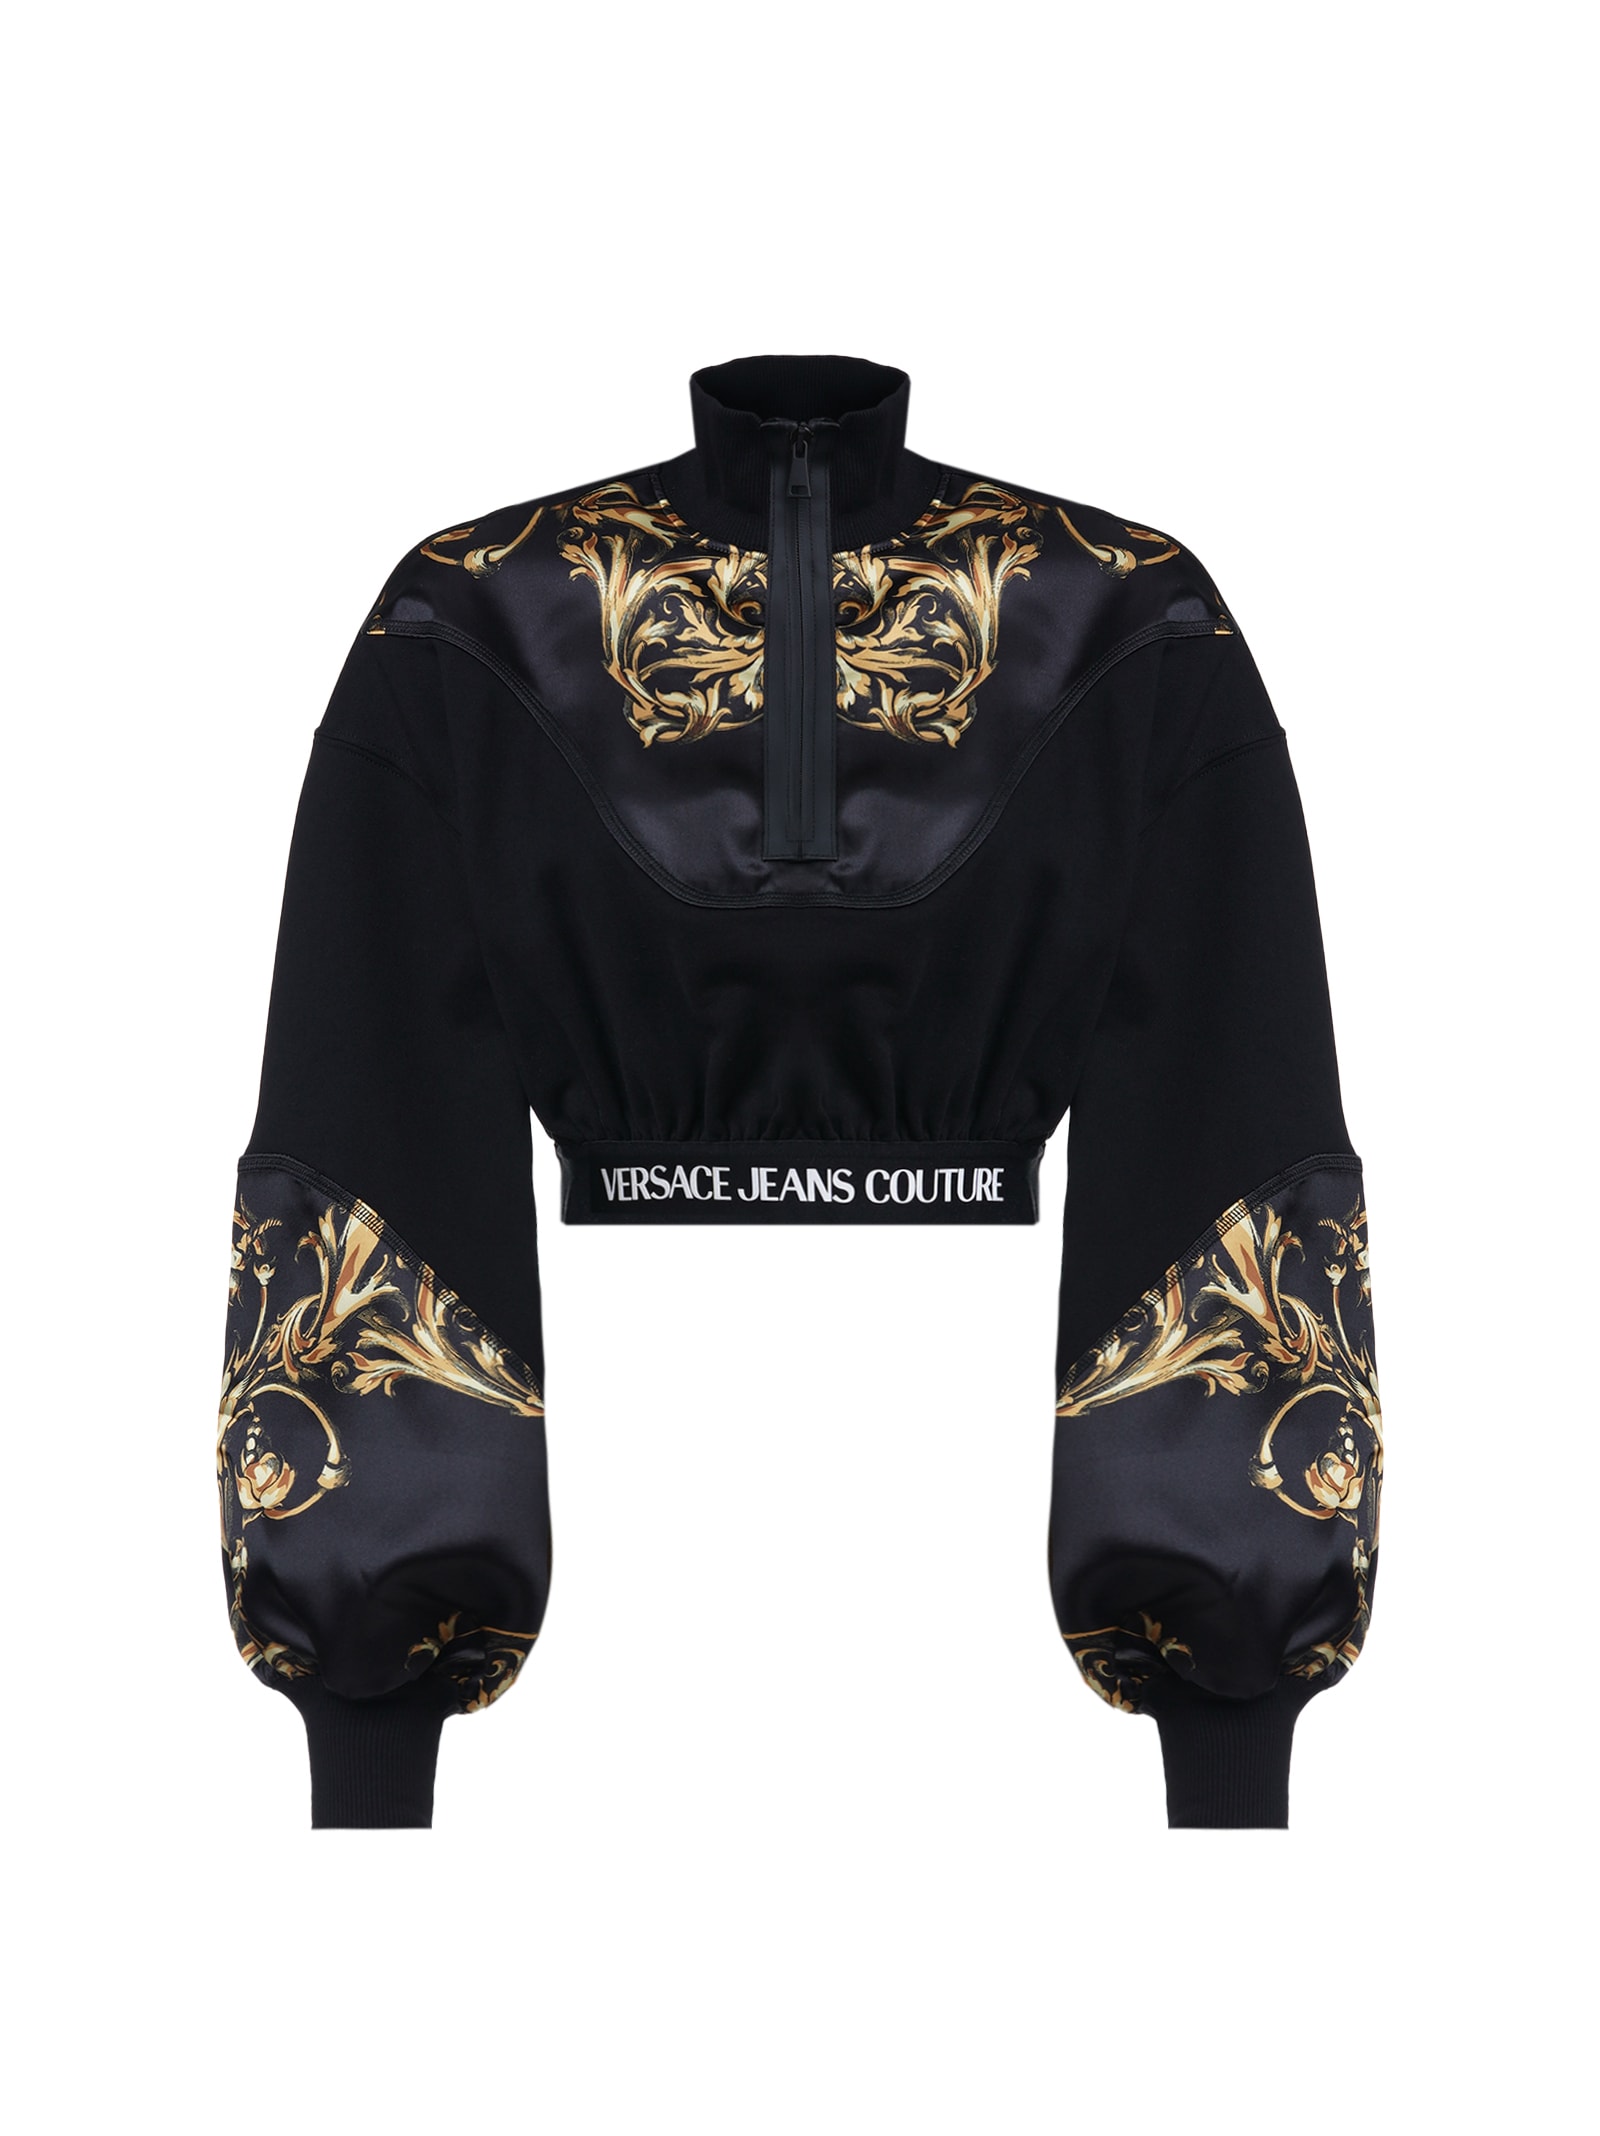 Versace Jeans Couture Sweatshirt With Print Satin Inserts